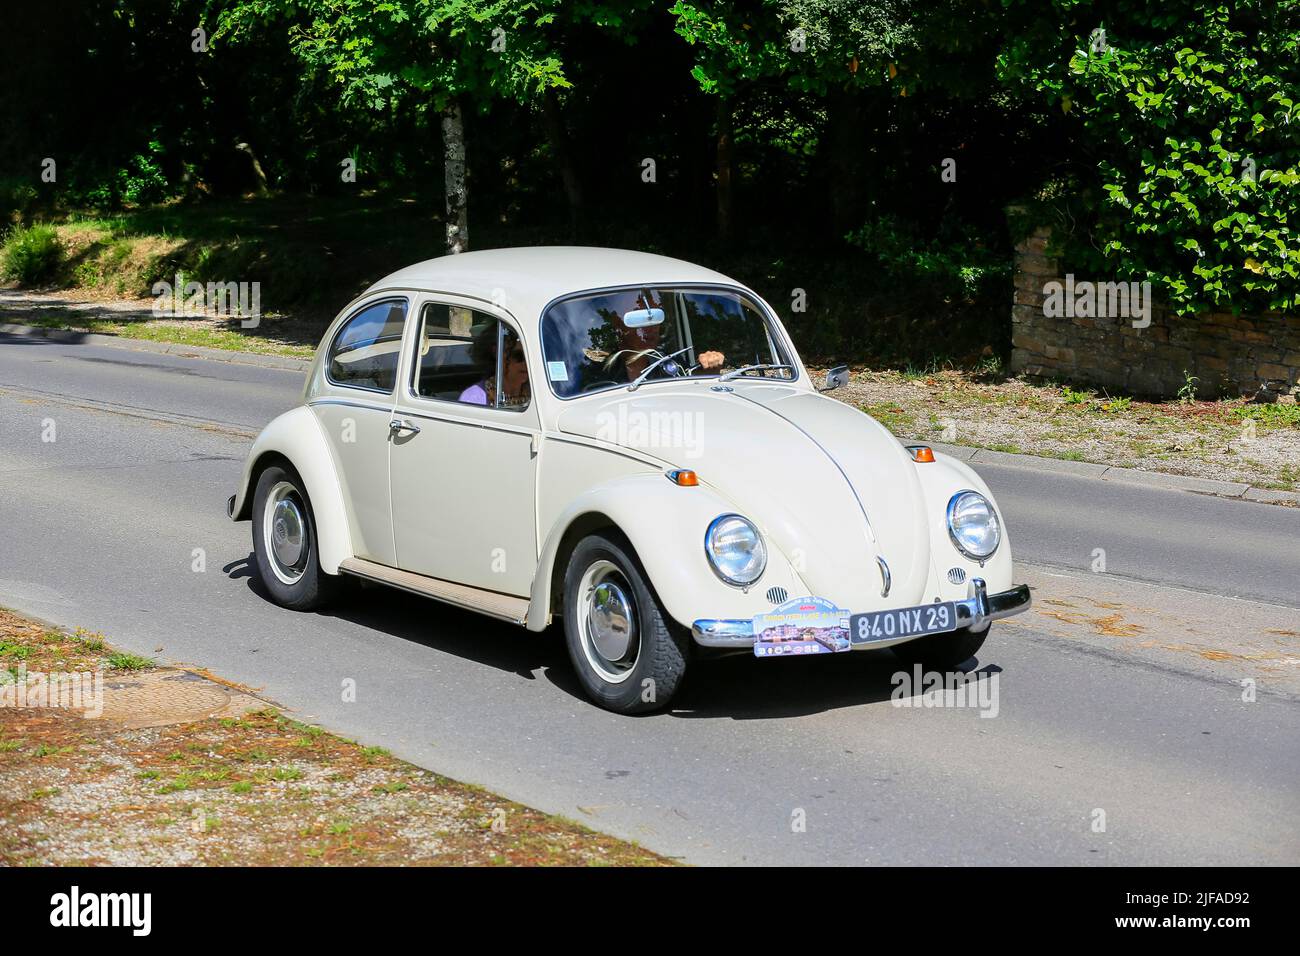 Volkswagen VW Beetle of the 60s, Vintage Car Ride 4th Embouteillage de la N12 to Landerneau, Department of Finistere Penn-ar-Bed, Region of Brittany Stock Photo